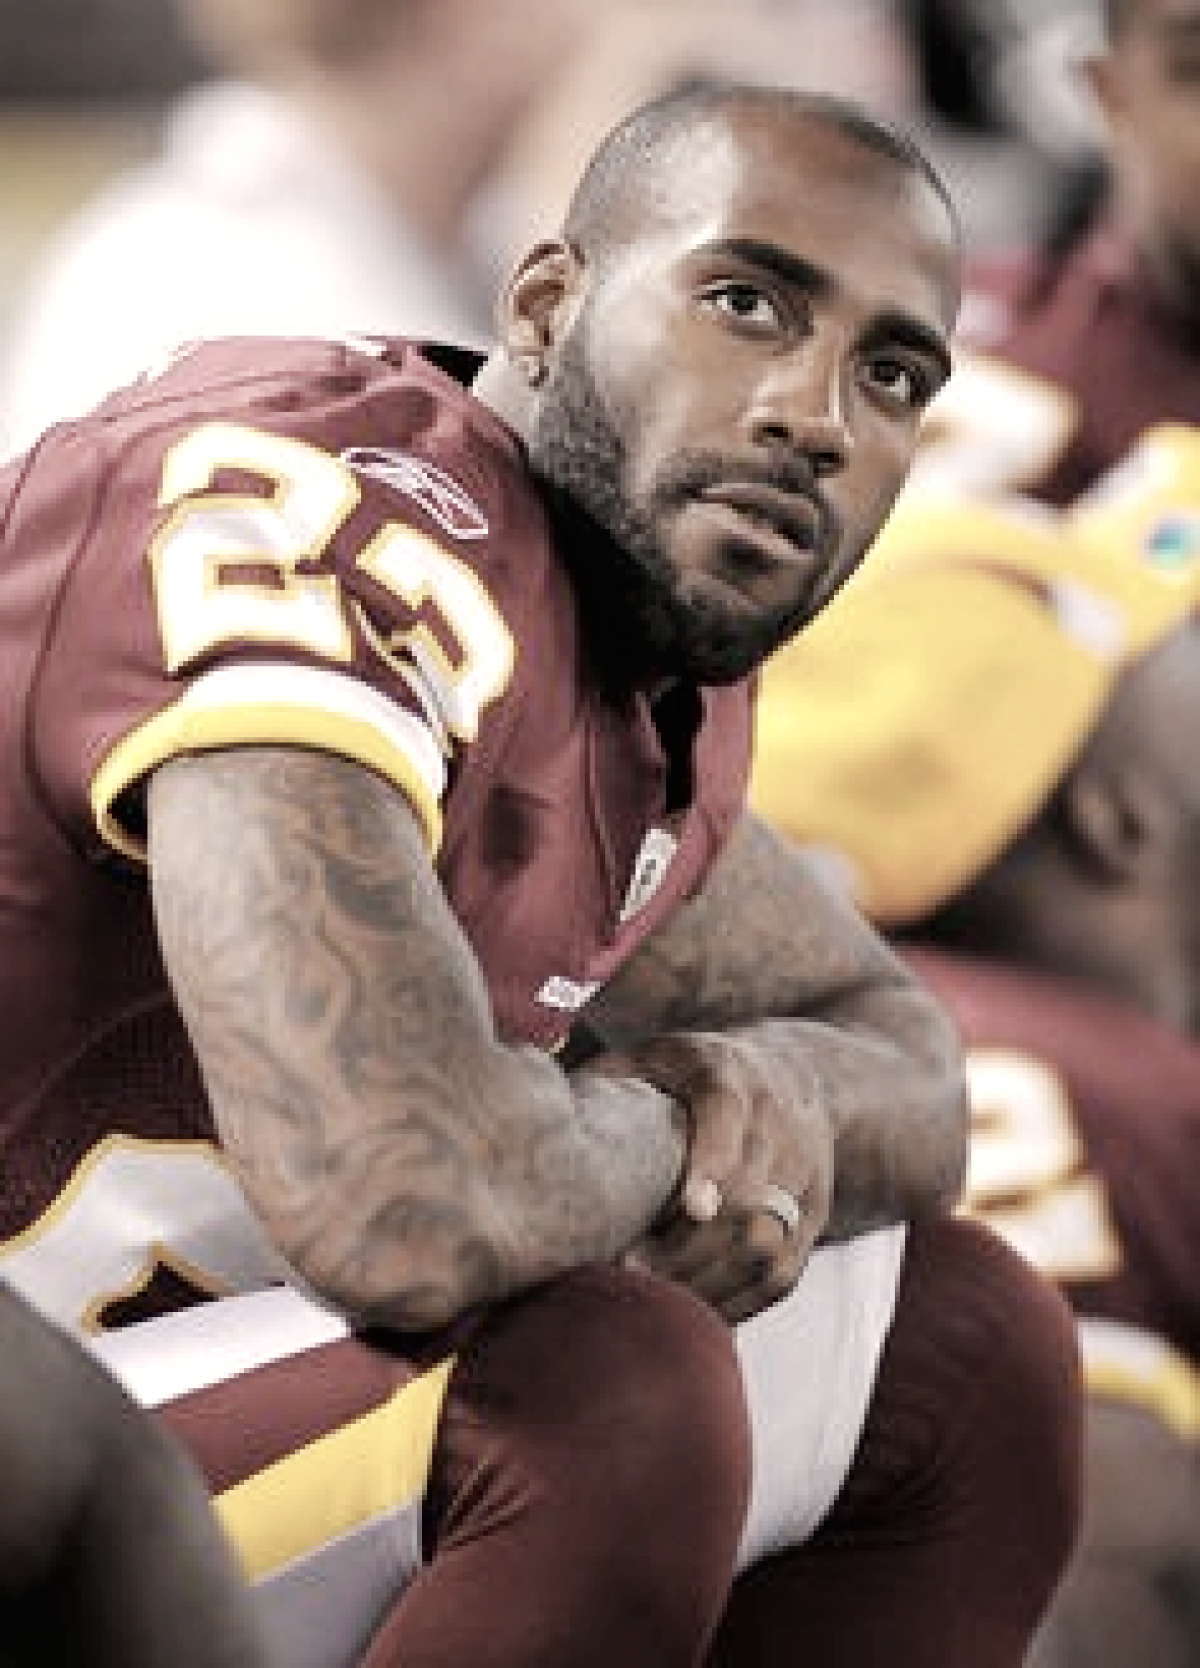 DeAngelo Hall undecided on retirement